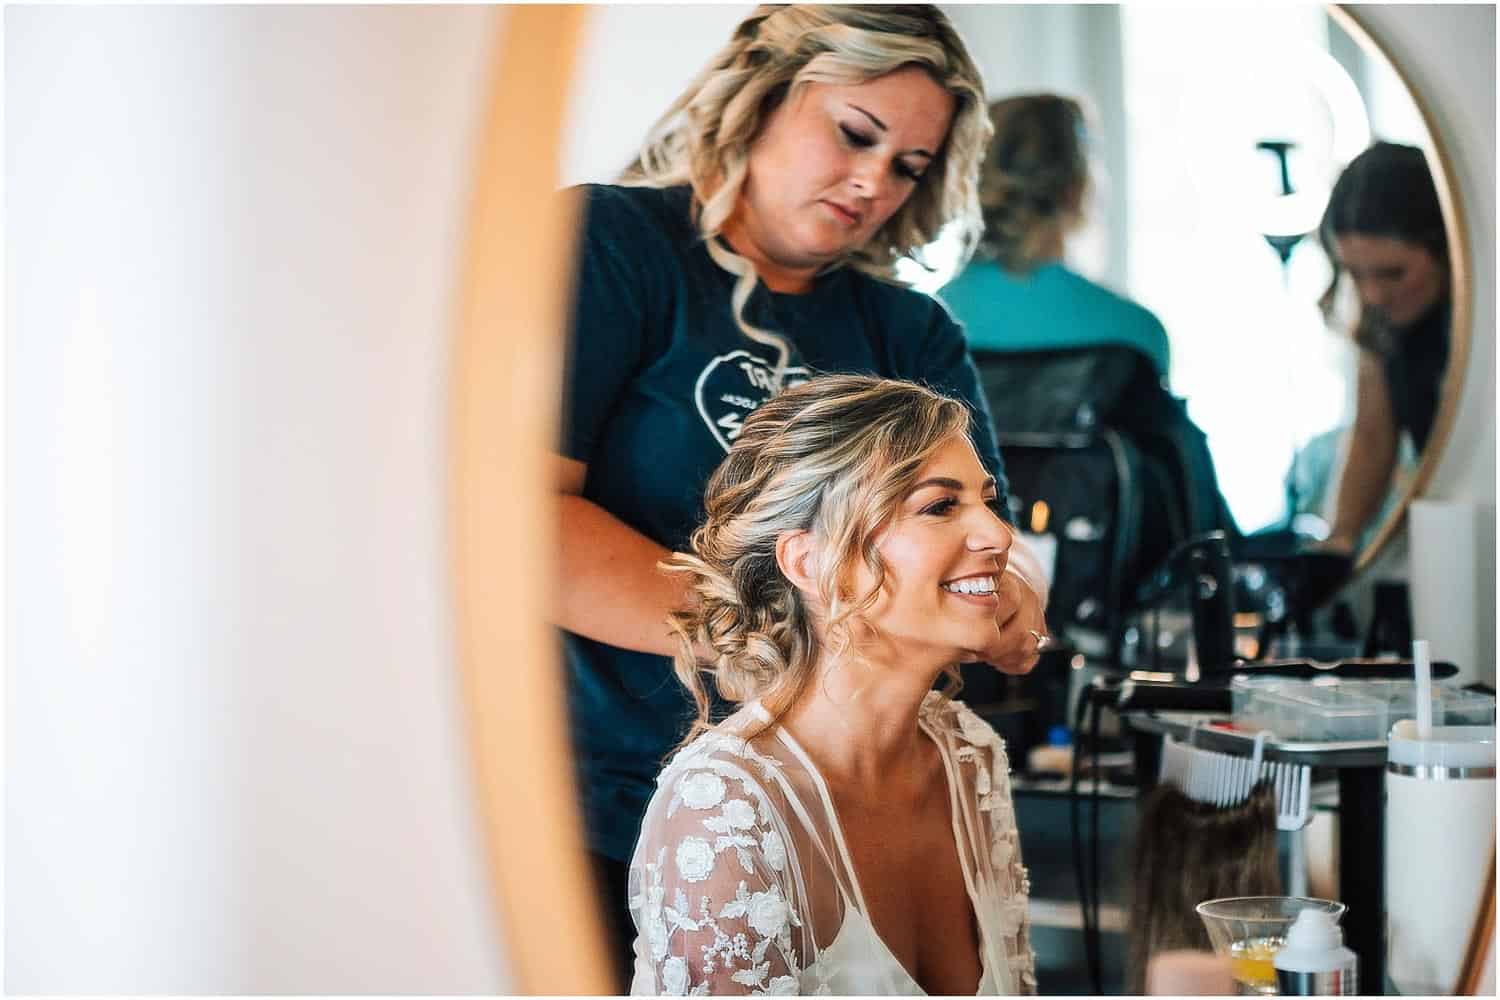 A bride smiling in a salon chair as a stylist fixes her hair, with other people and salon equipment blurred in the background.